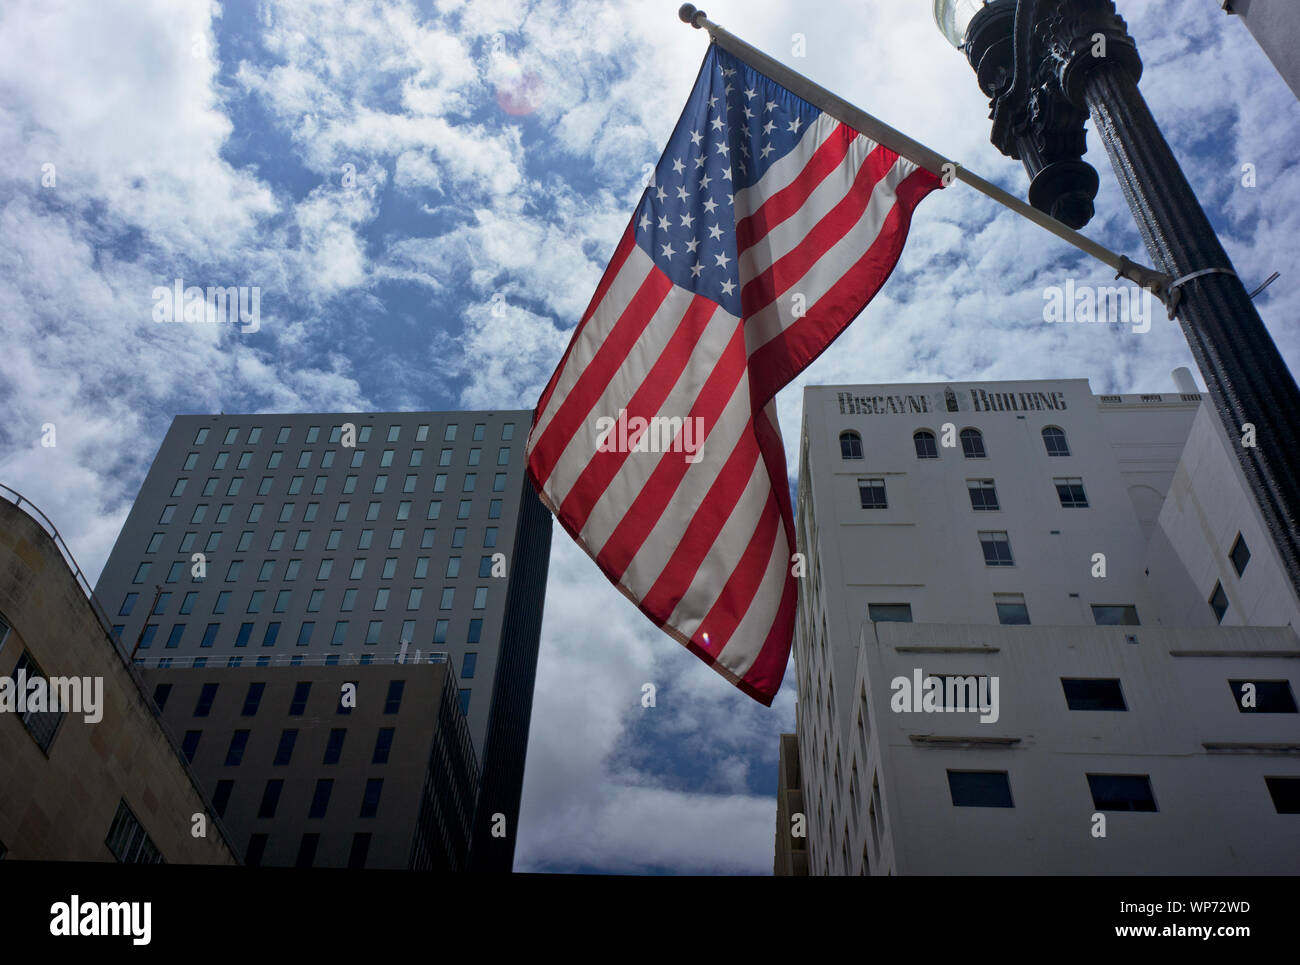 View of American flag and buildings in Historic District of Downtown Miami, Florida, USA Stock Photo